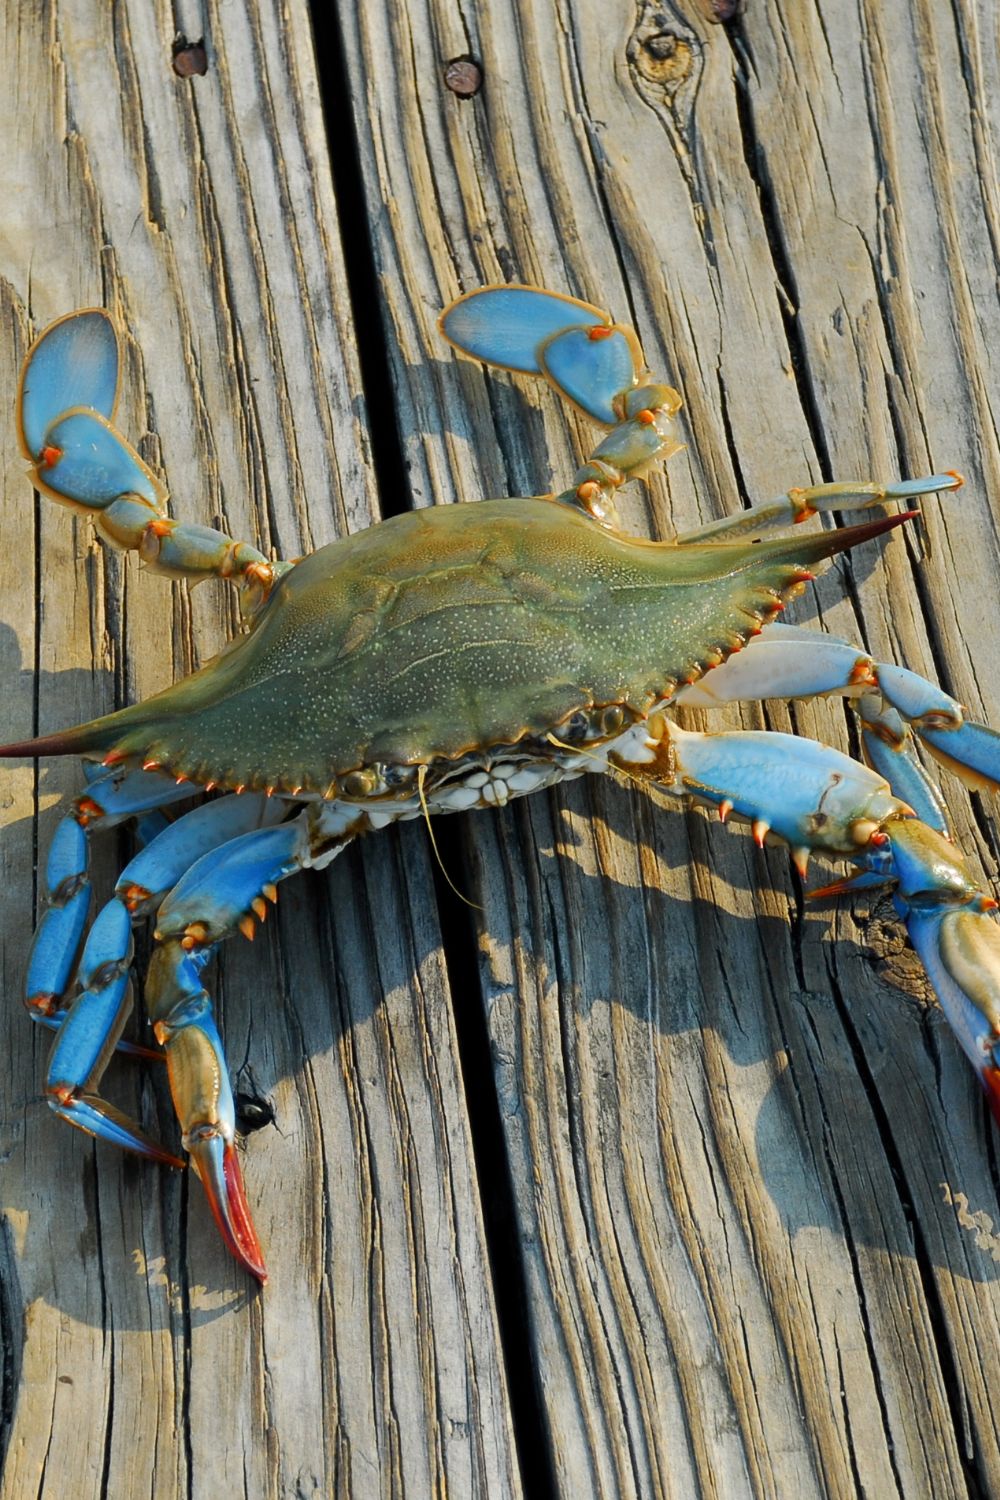 How Do Blue Crabs Eat?